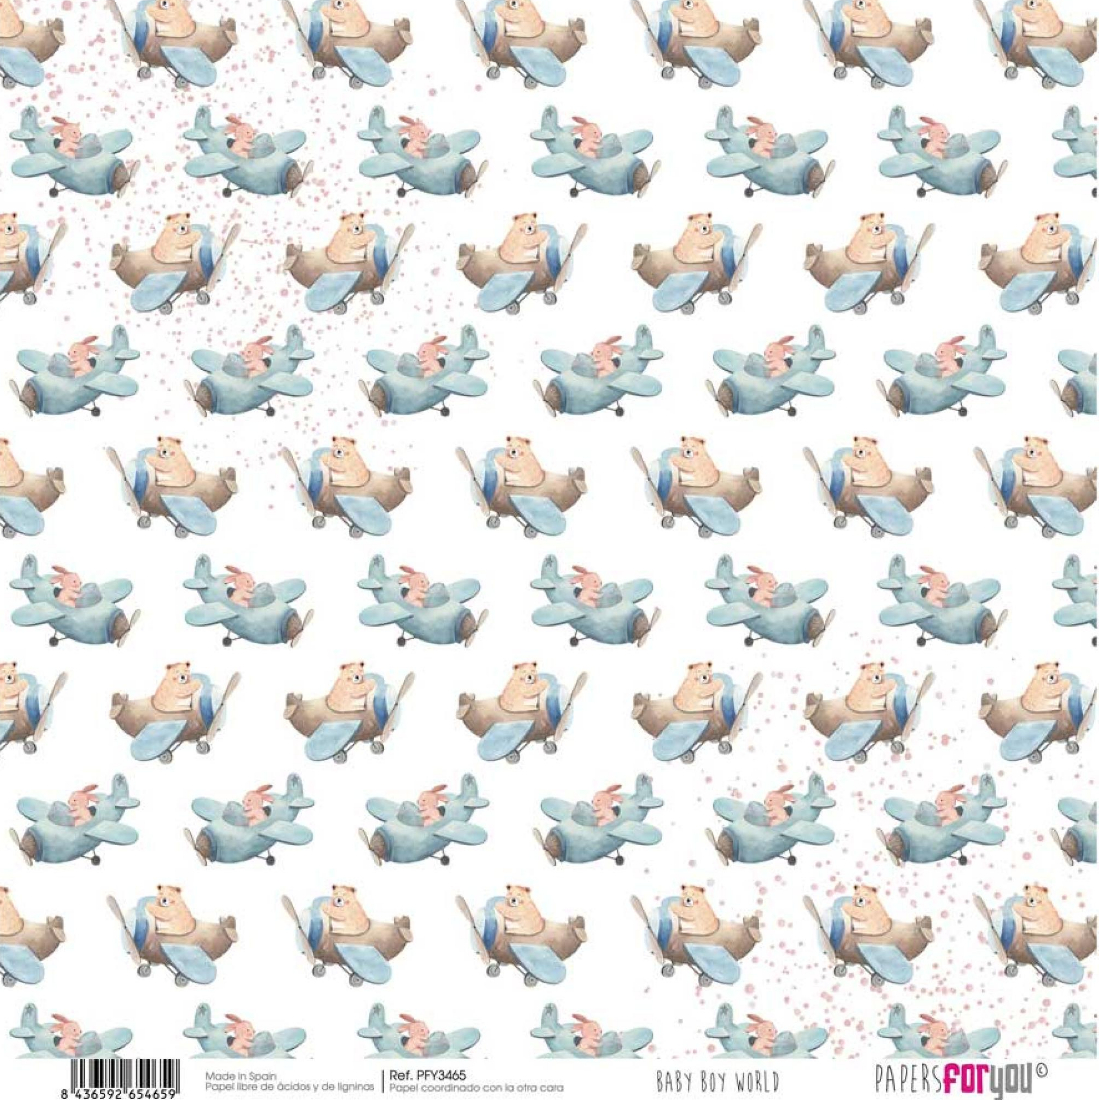 Bloco Papel Scrapbooking Baby Boy World PFY-3460 papersforyou